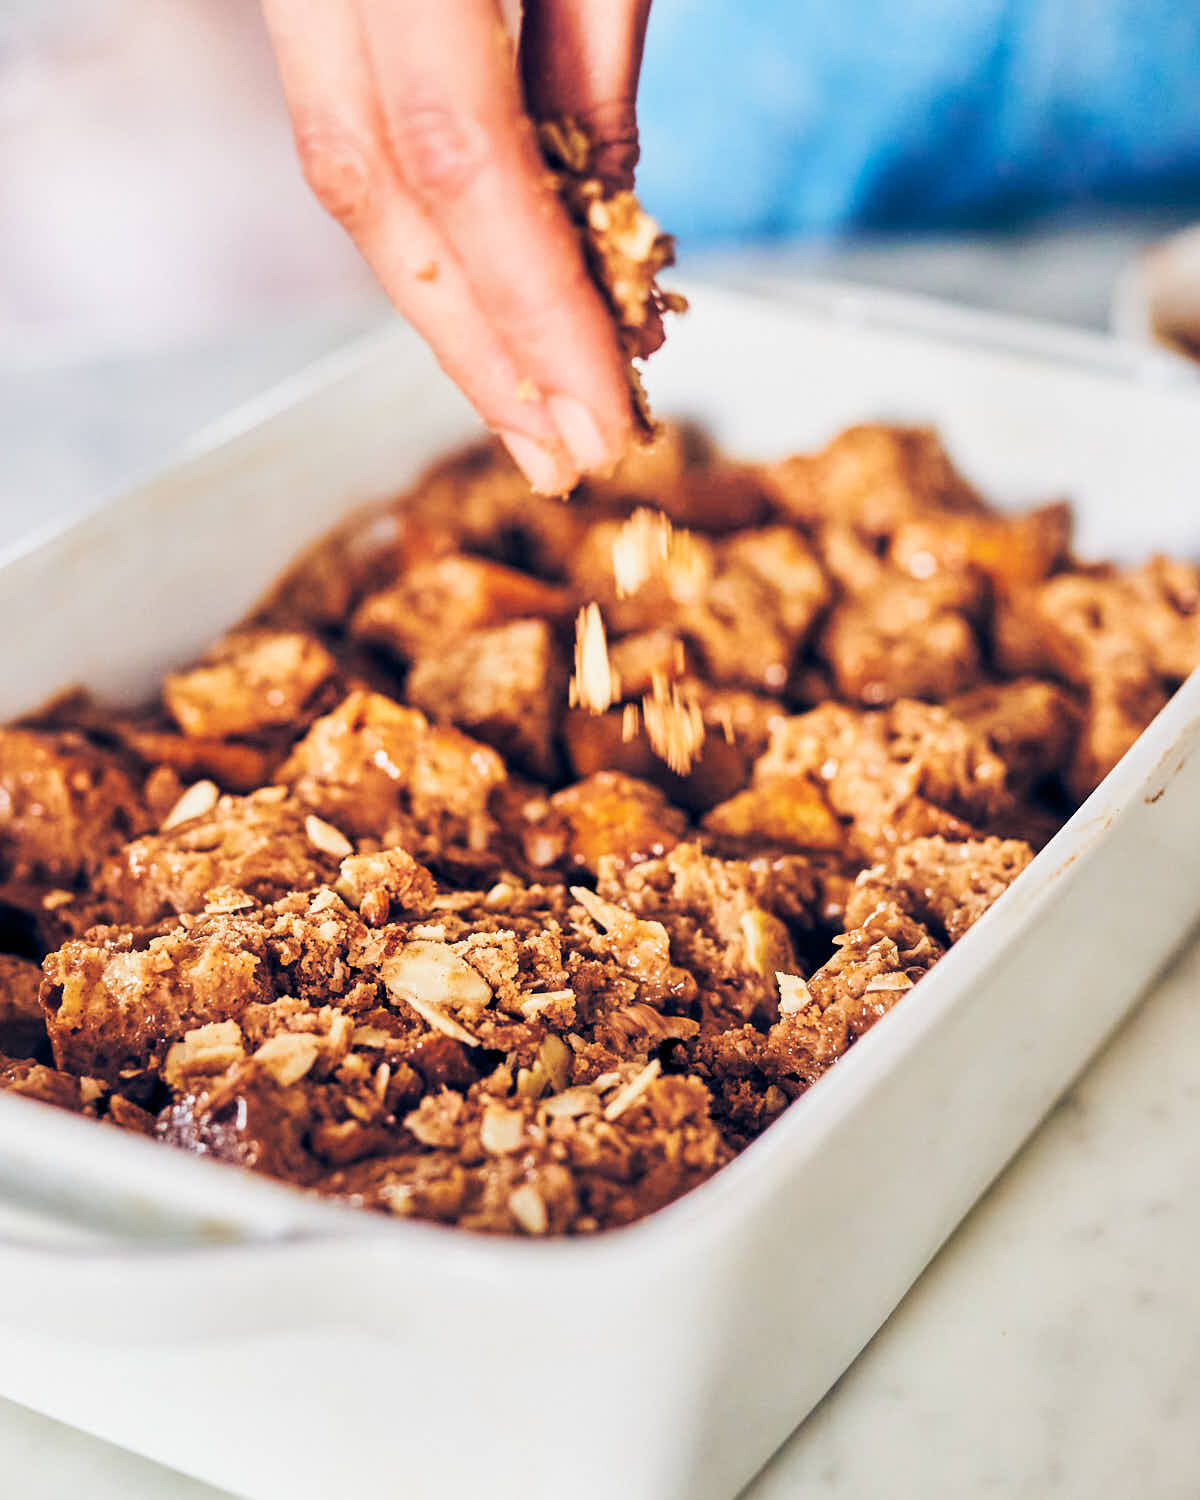 Sprinkling an almond cinnamon crumble over french toast casserole before baking.